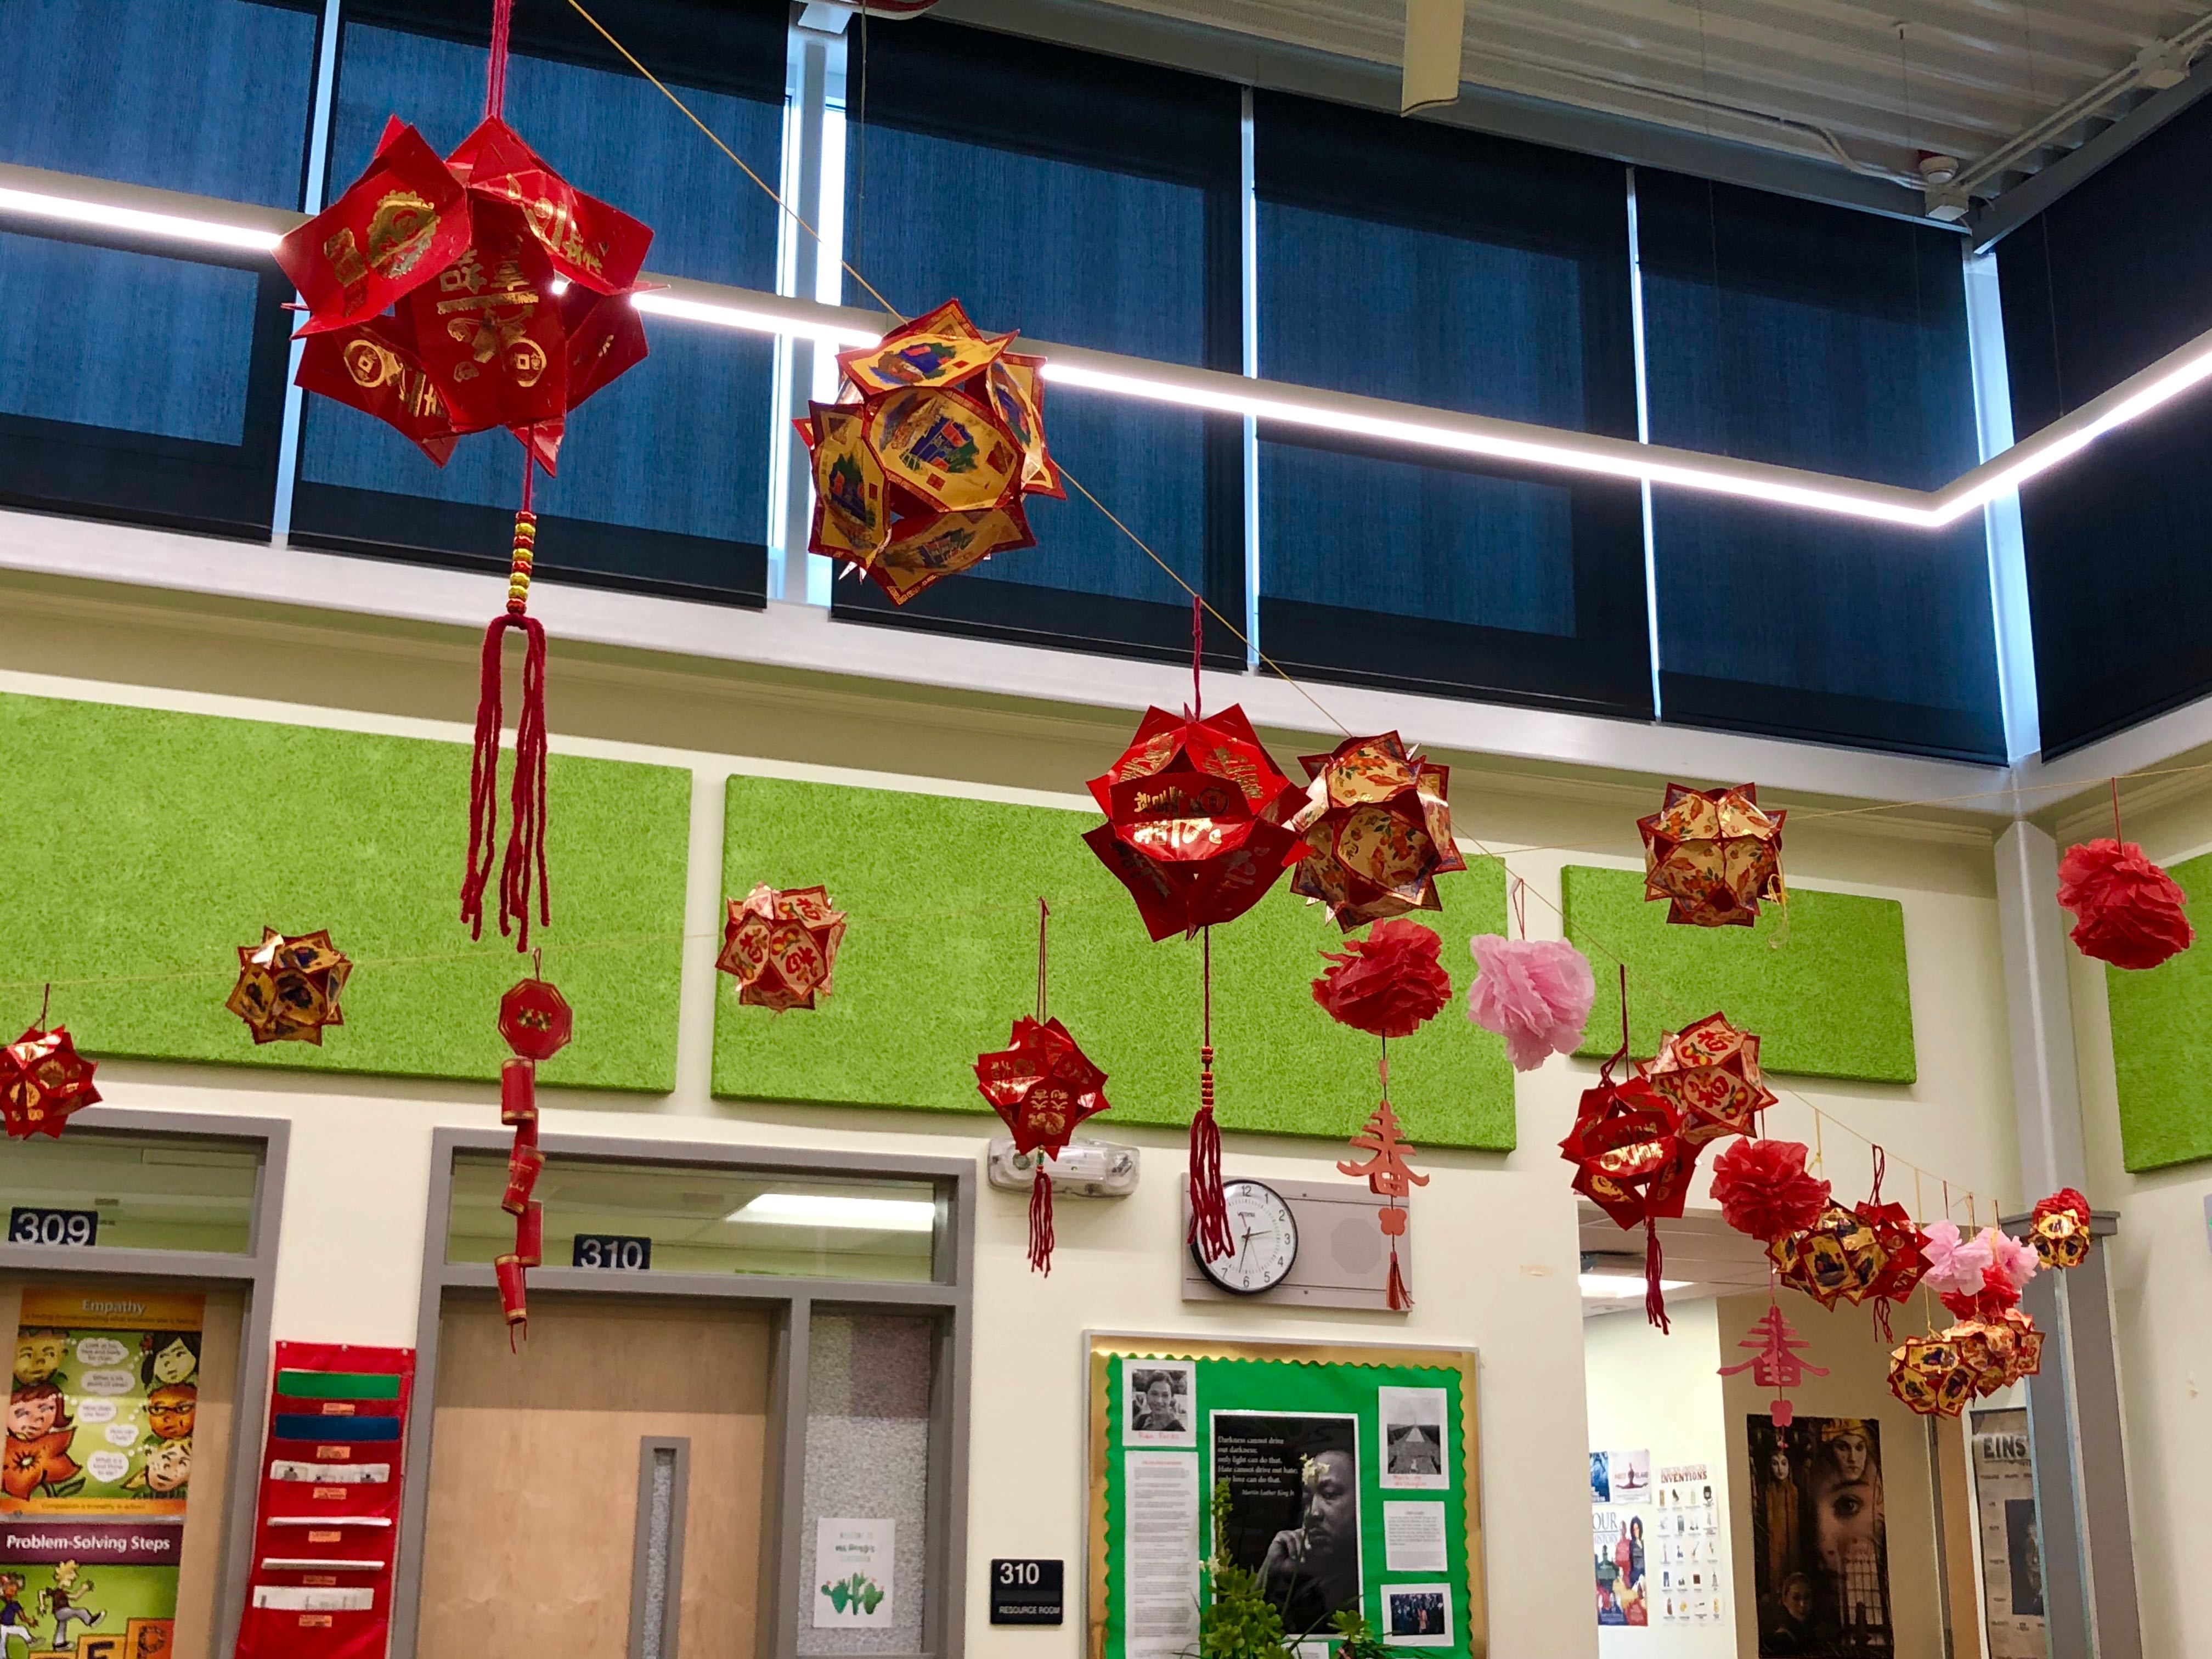 Lunar New Year decorations in the school multi-purpose room